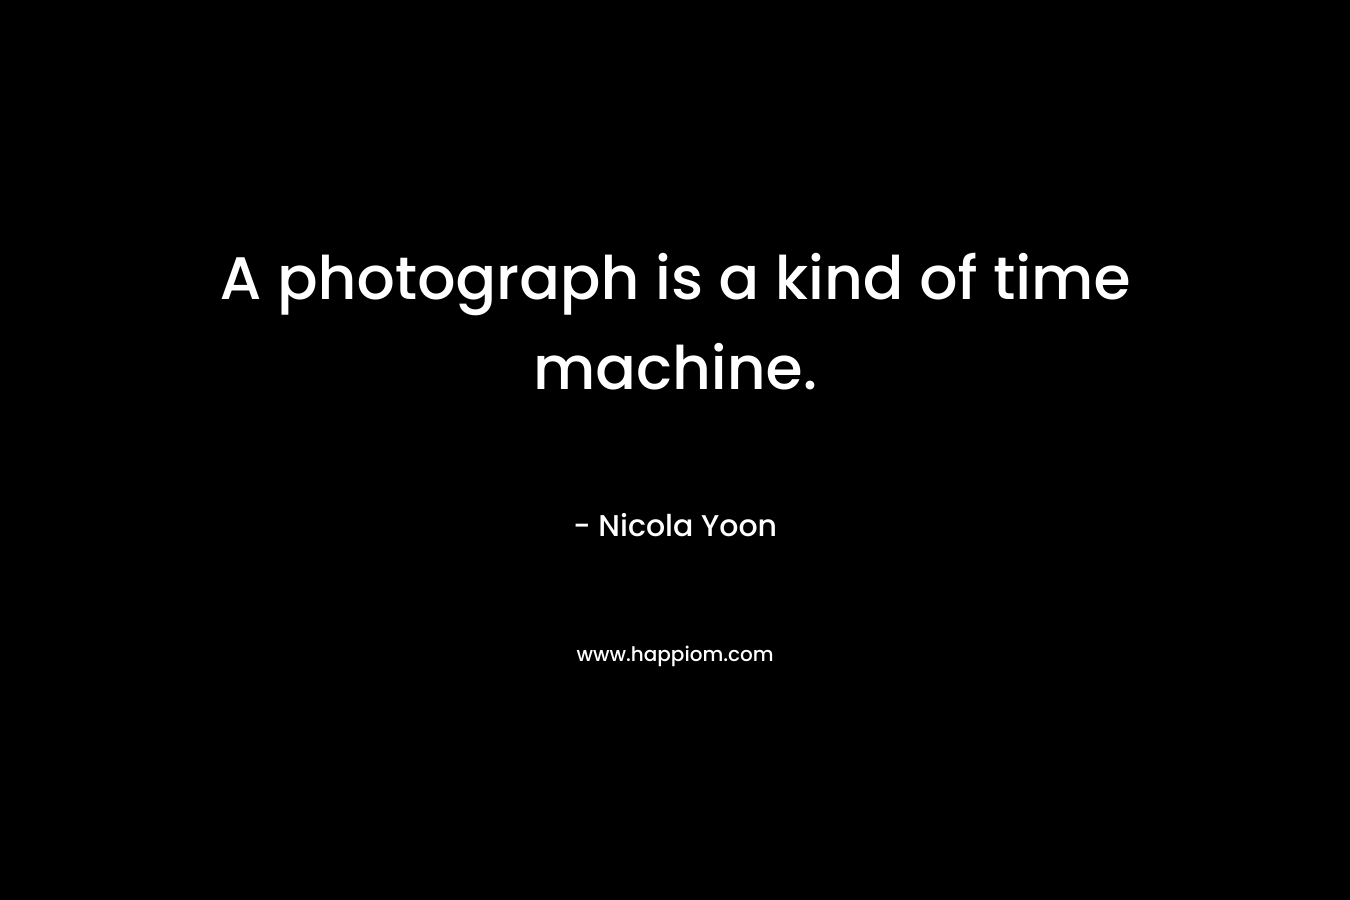 A photograph is a kind of time machine.